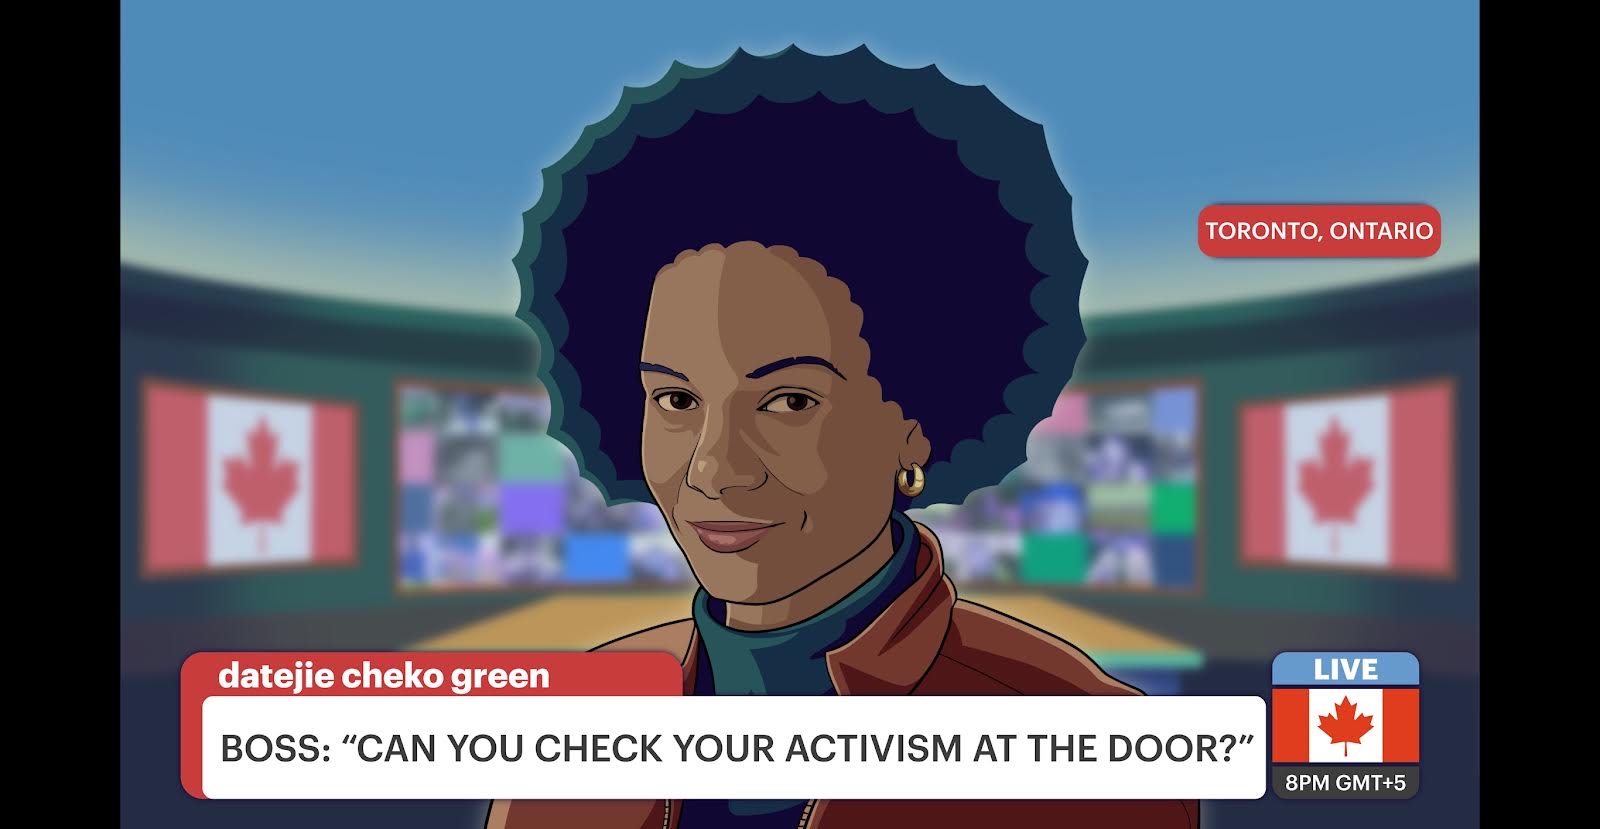 A woman on a news television screen reporting from Toronto, Canada faces viewers with the chiron, "Boss: can you check your activism at the door?" Illustration by Walker Gawande